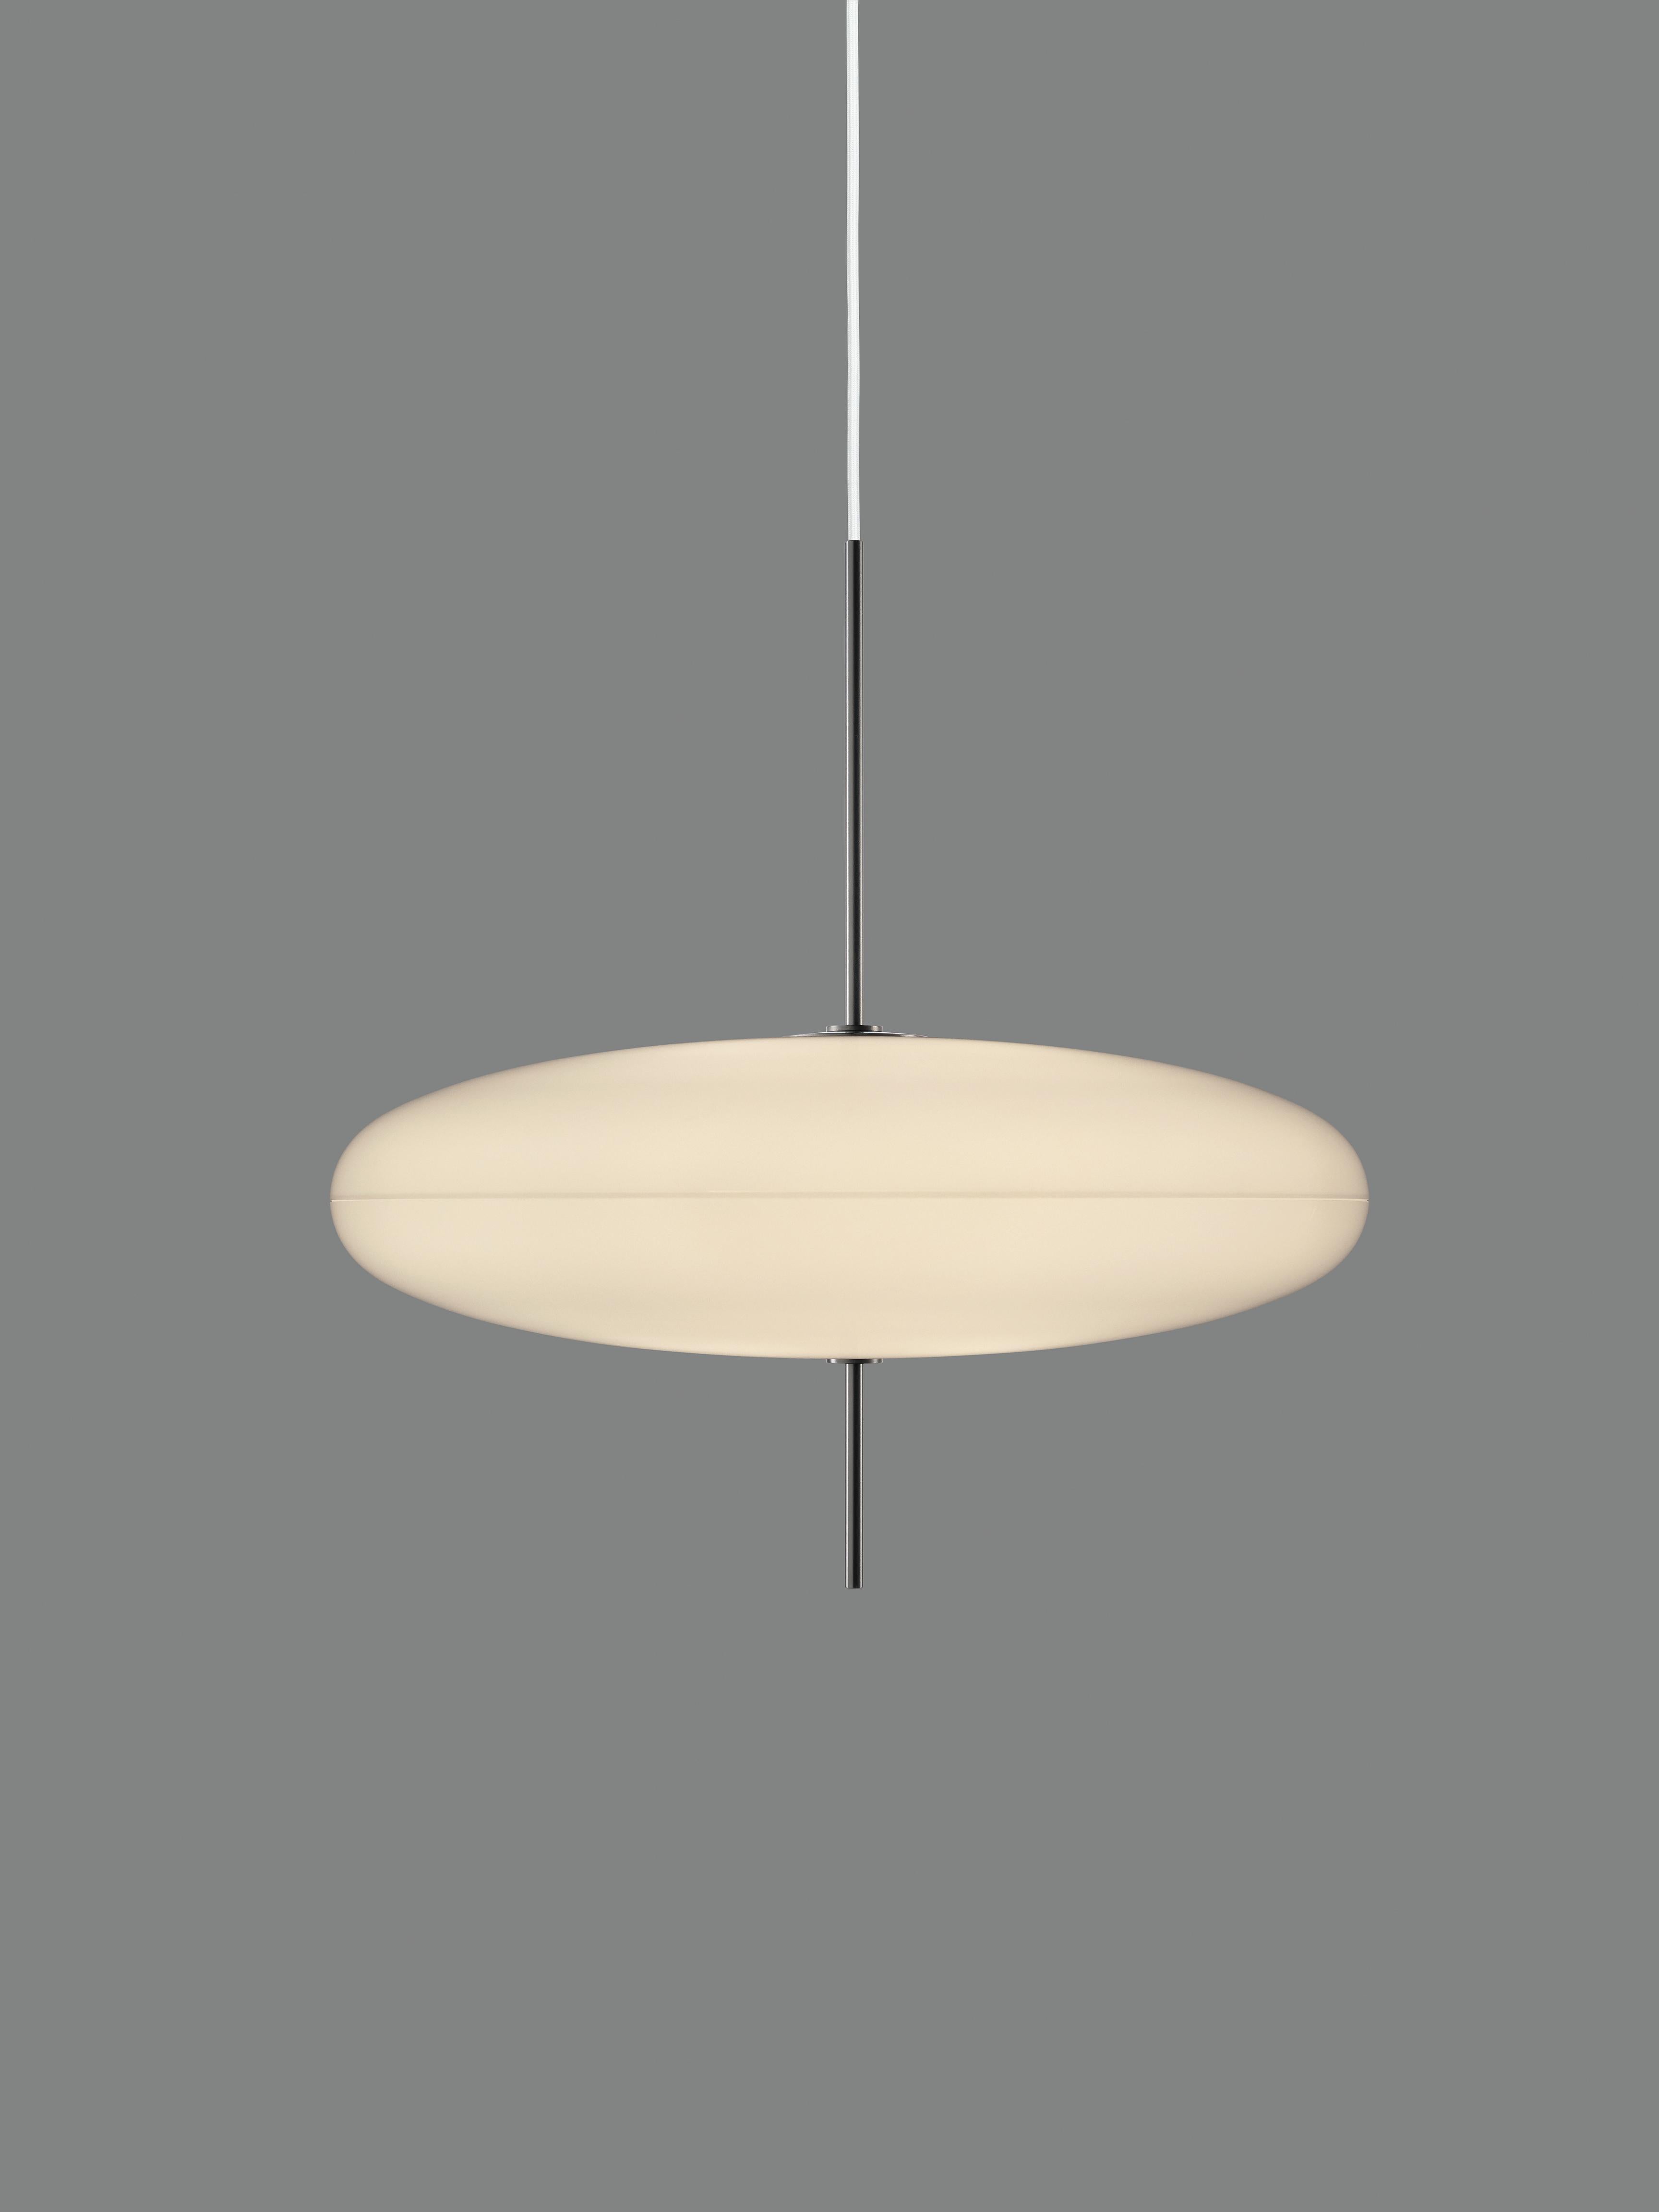 Painted Gino Sarfatti Model No. 2065 Ceiling Light For Sale